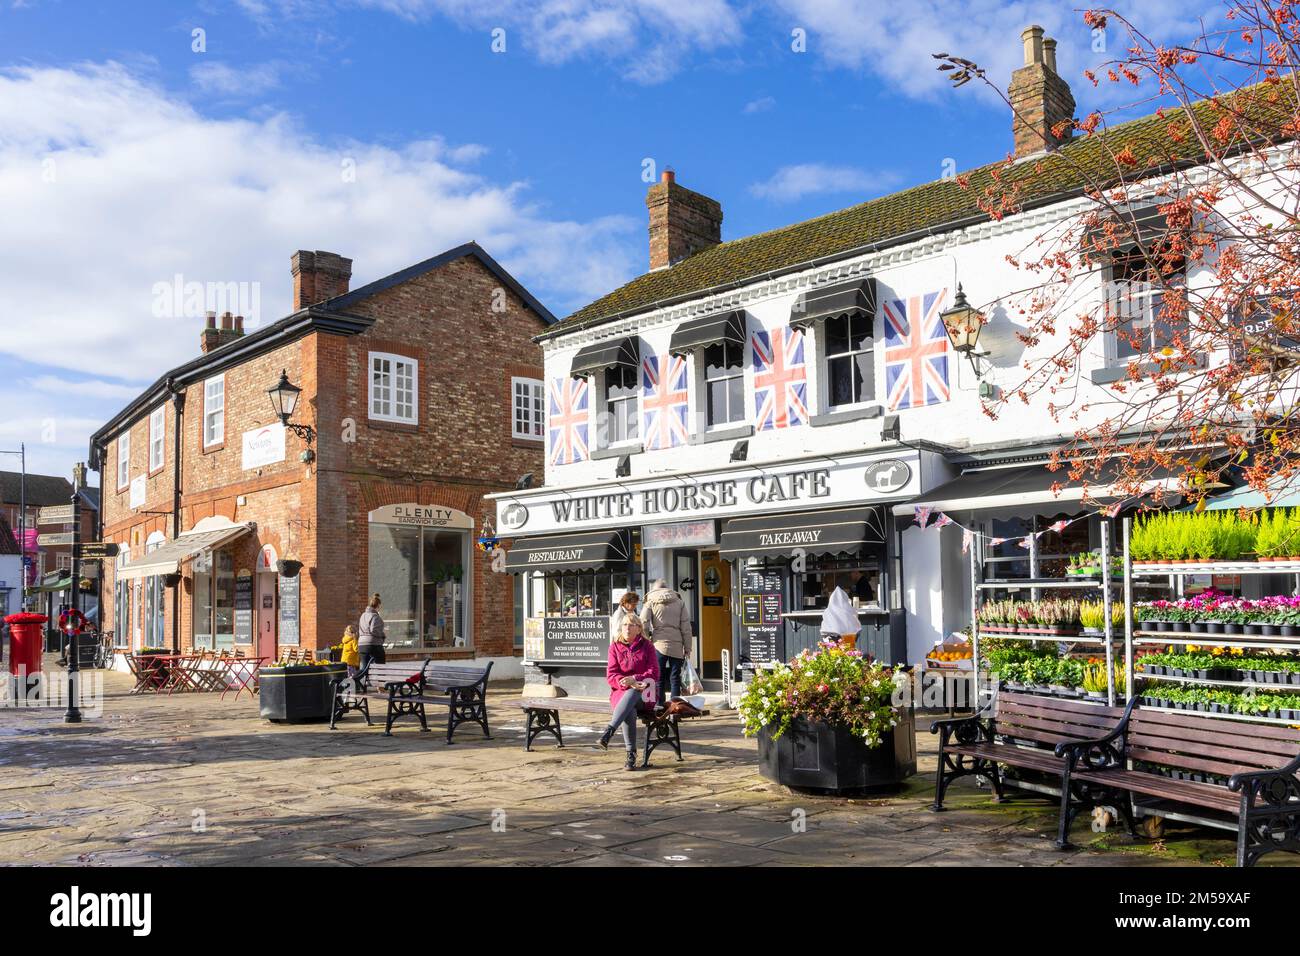 Thirsk North Yorkshire Thirsk Whire Horse cafe' fish and chips shop in Thirsk Market Place Thirsk North Yorkshire Inghilterra UK GB Europe Foto Stock